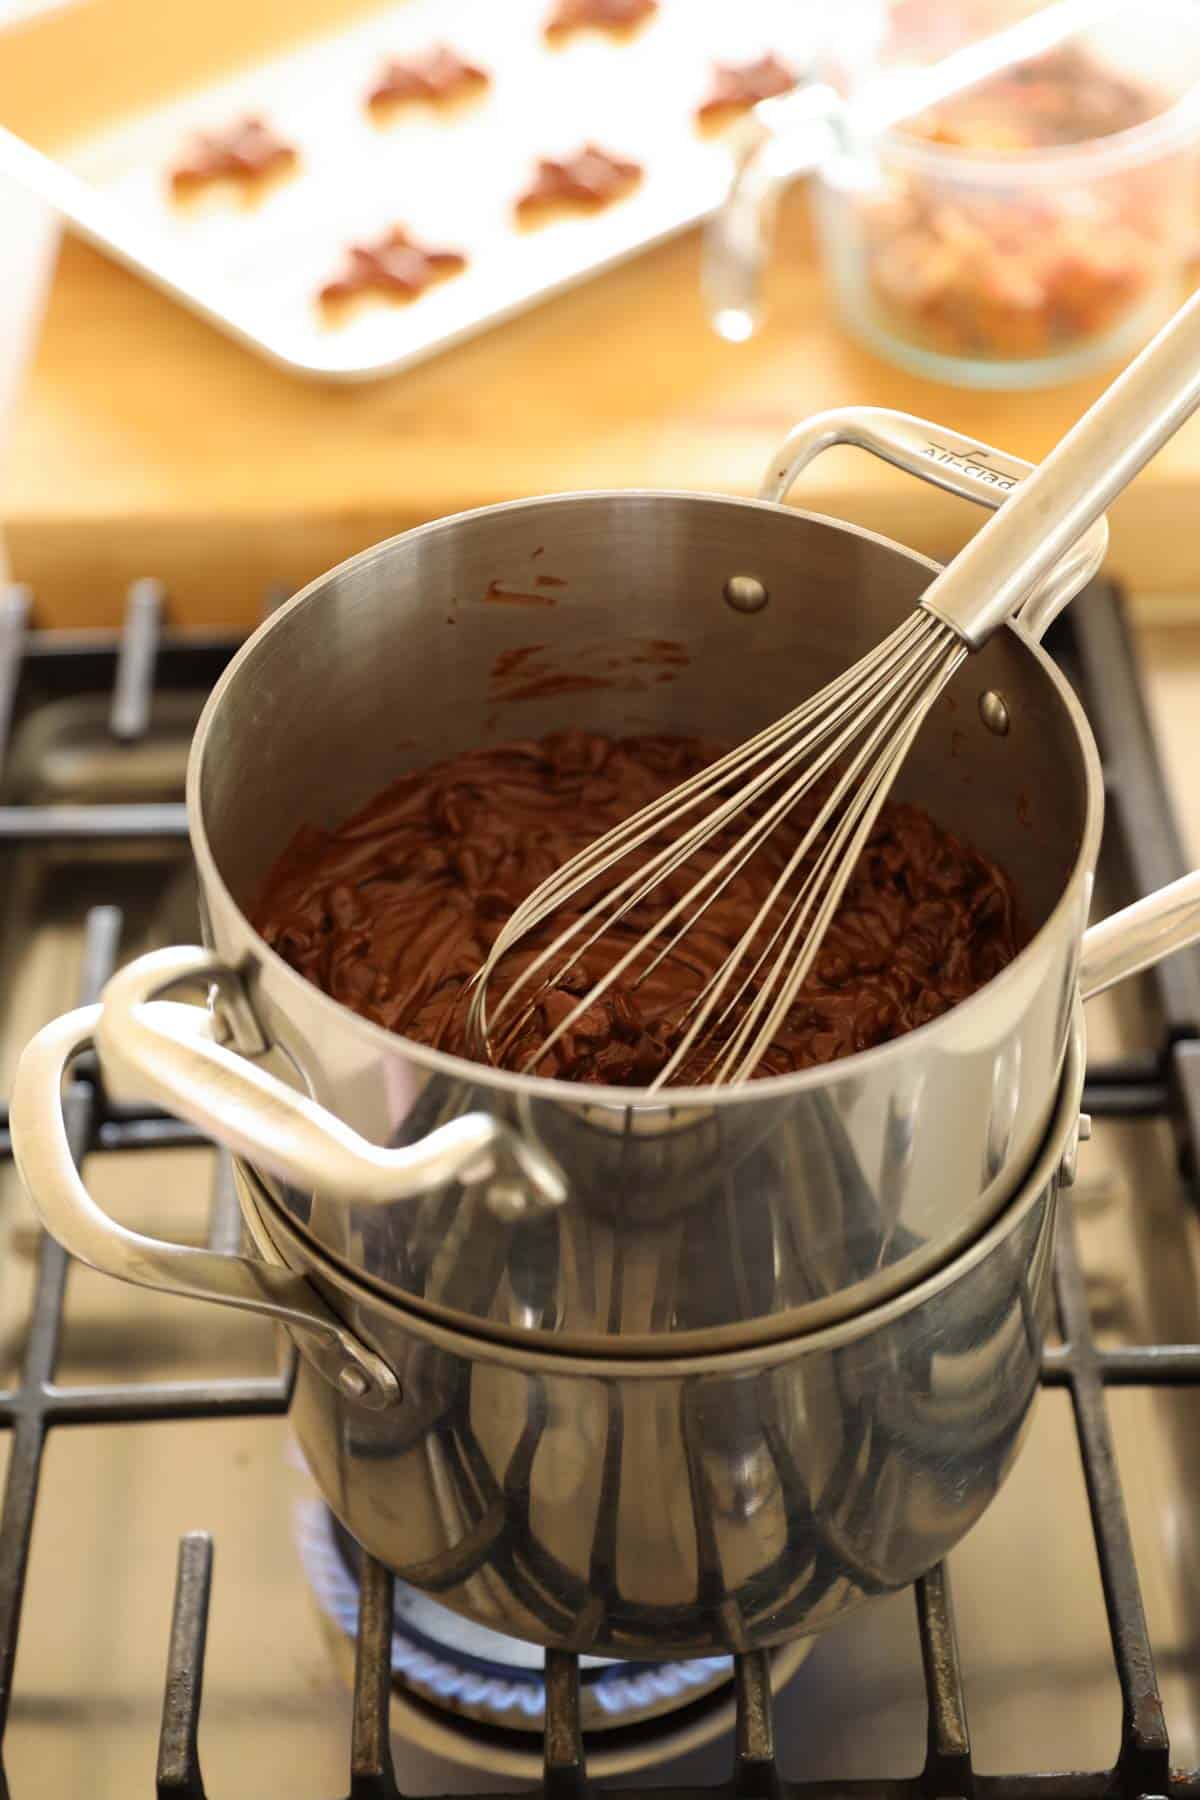 Melting Chocolate chips in a double boiler on a cooktop